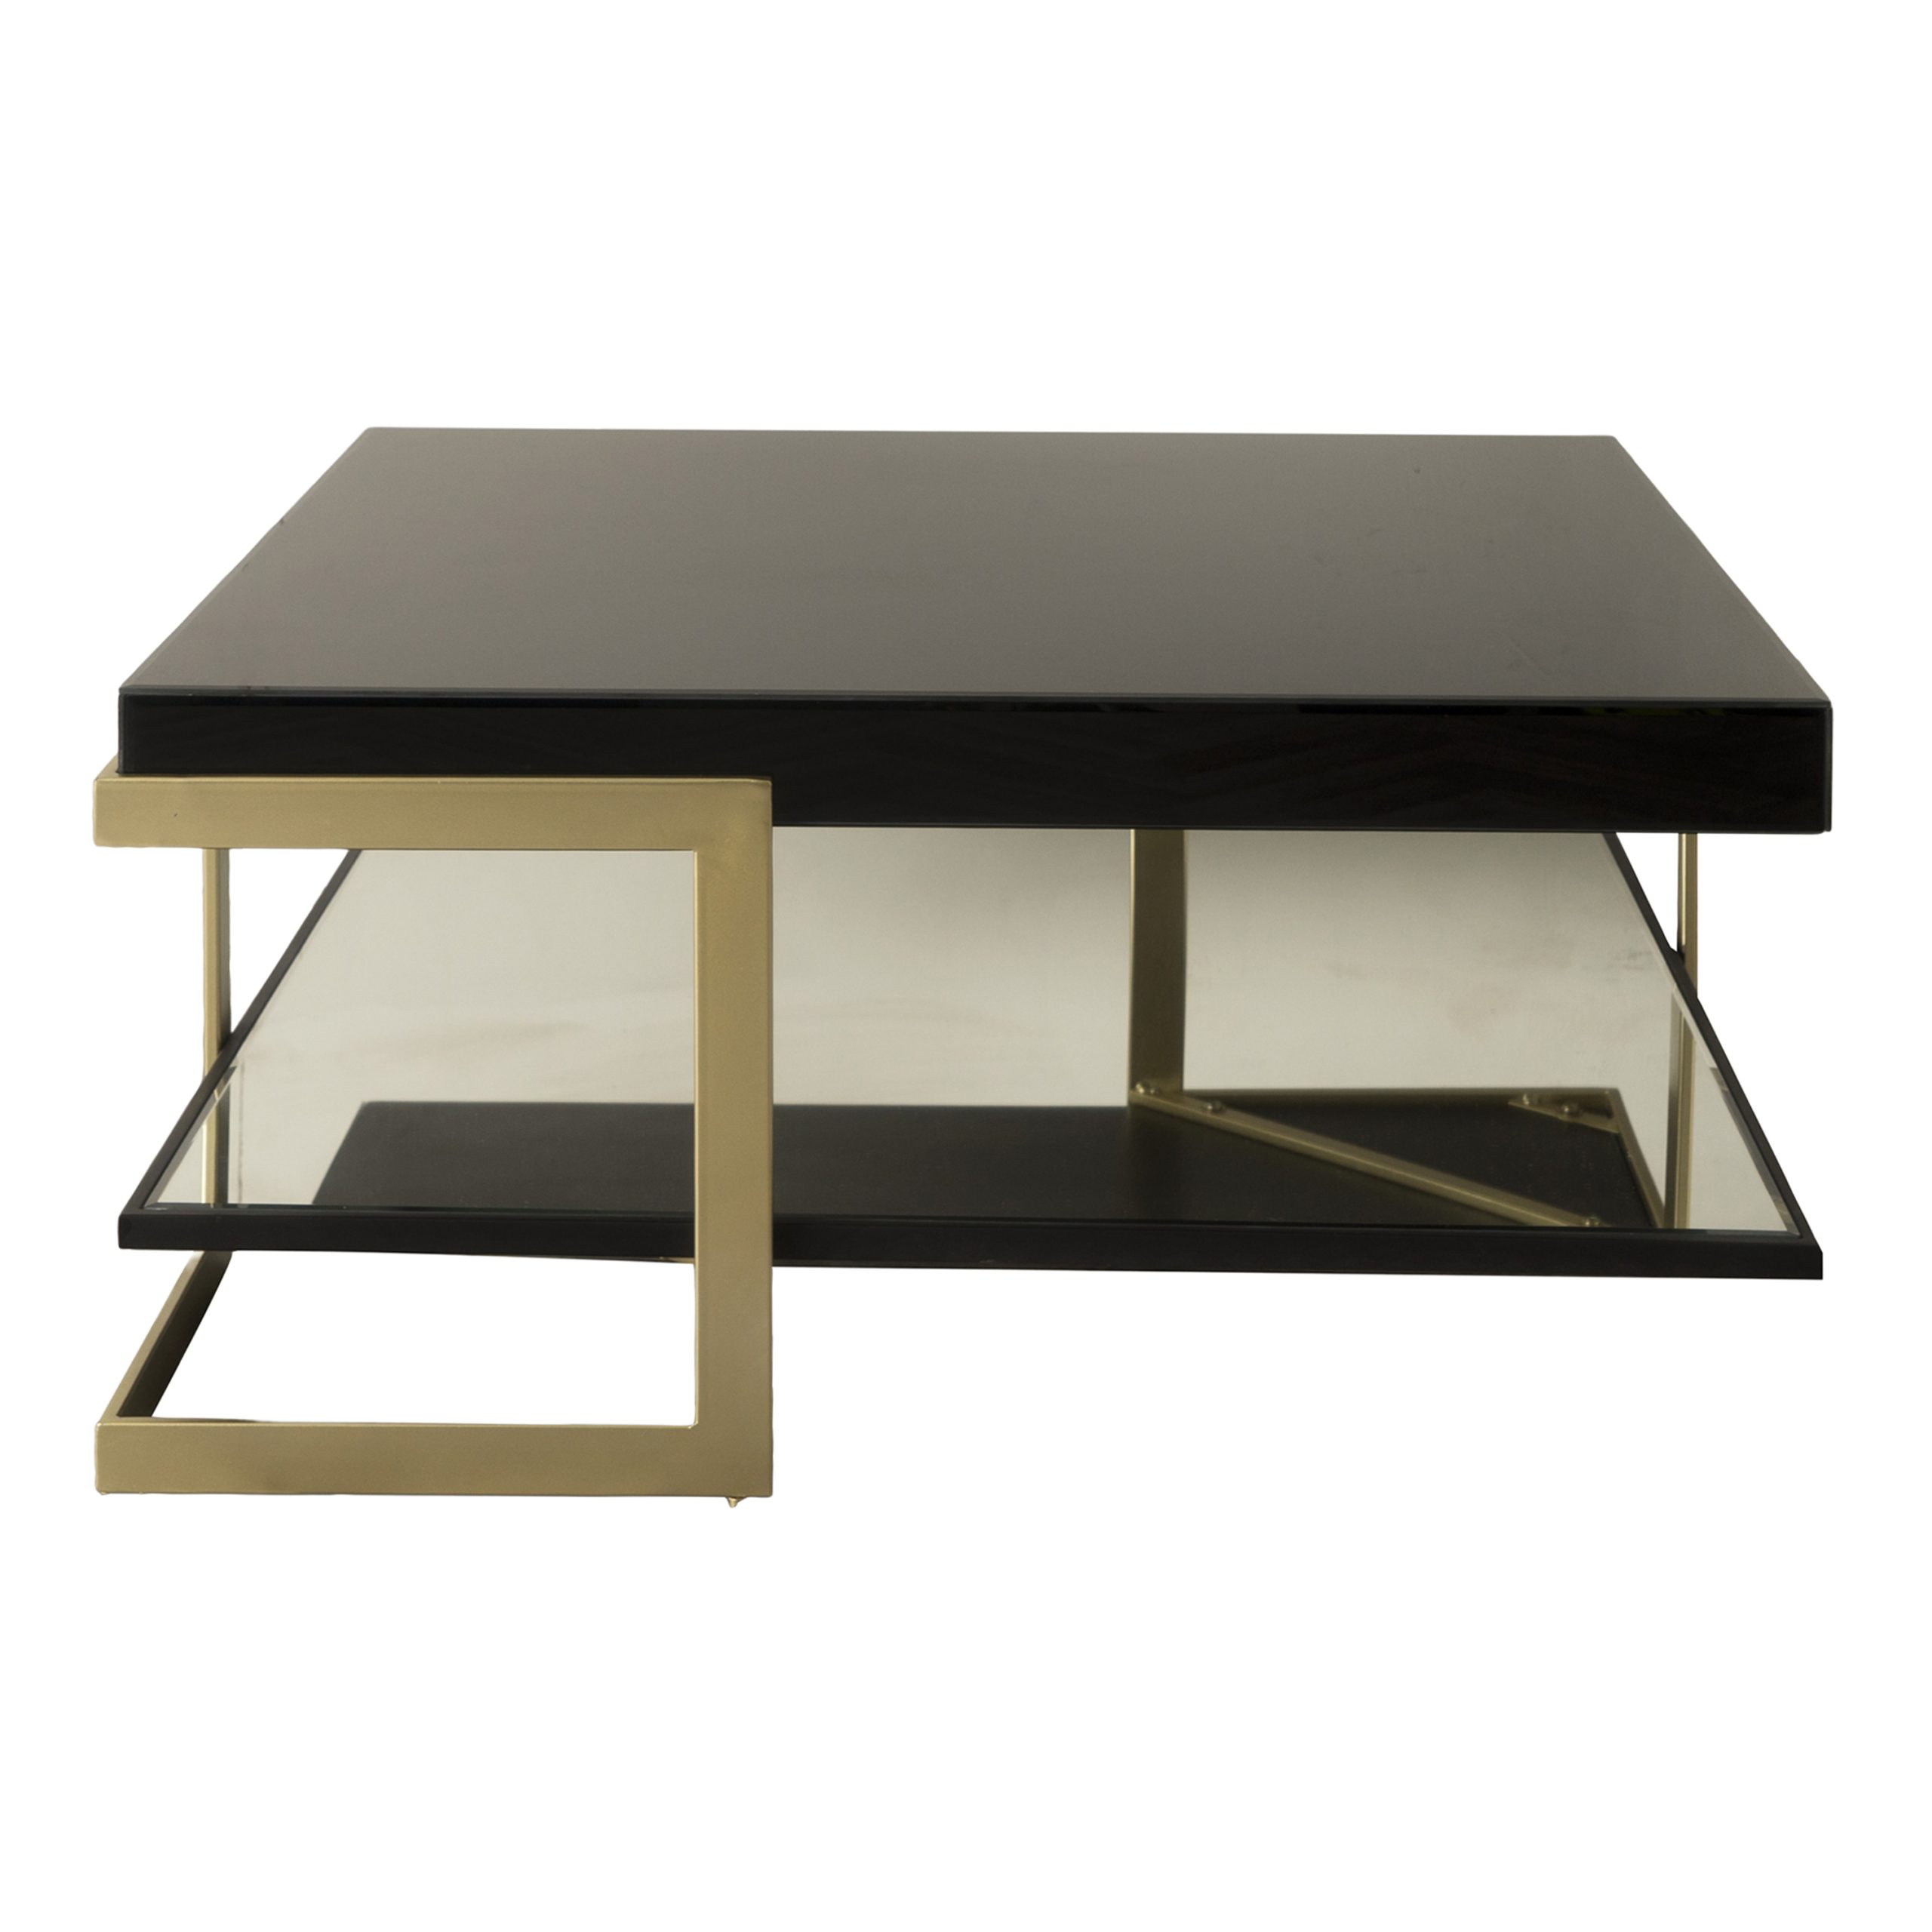 Gallery Direct Ardella Coffee Table